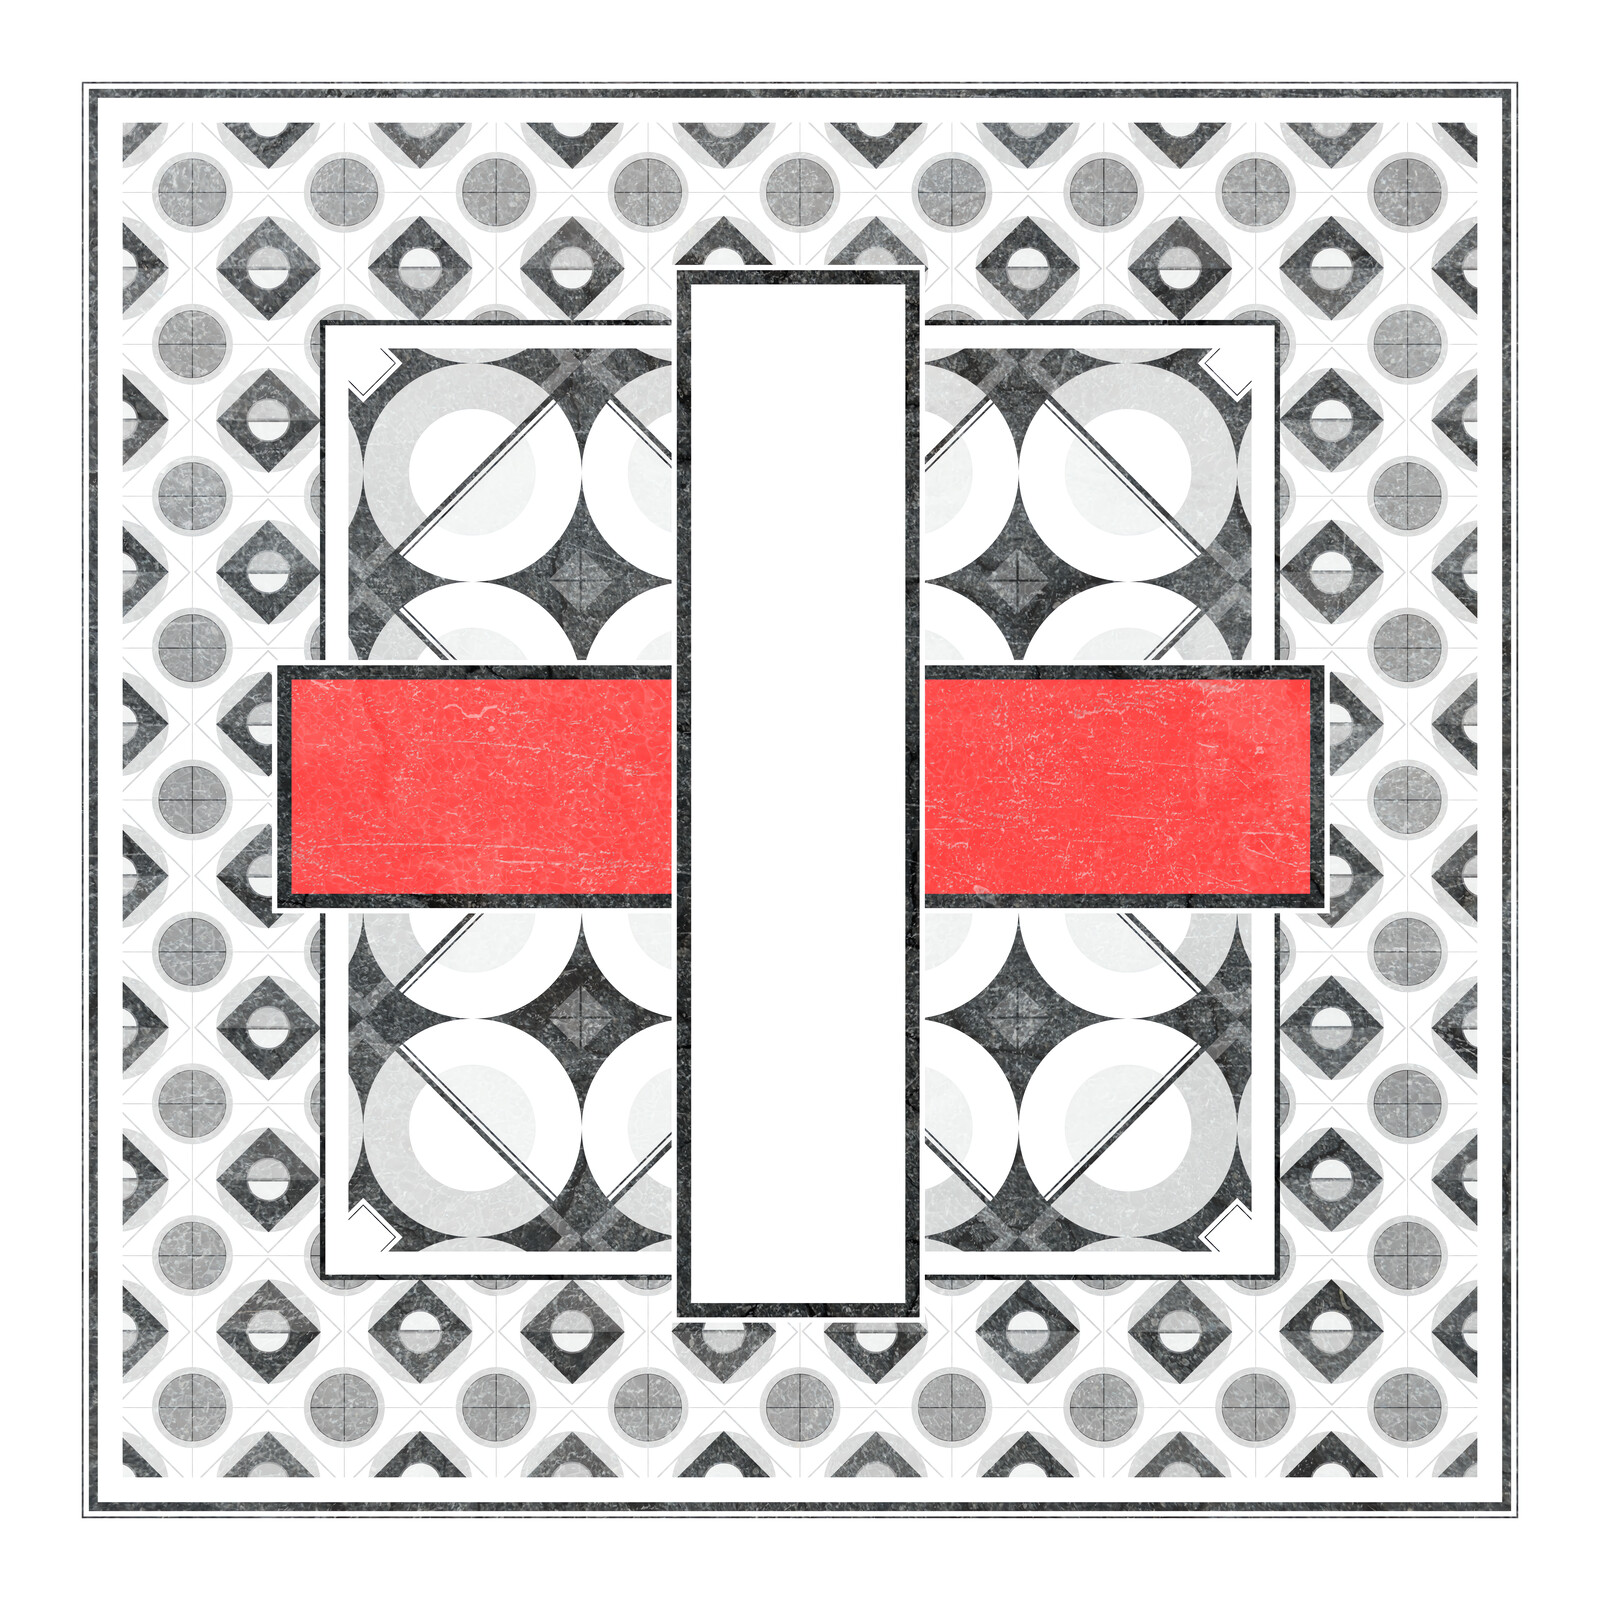 A vertical white band on top of a horizontal red band, forming a cross.